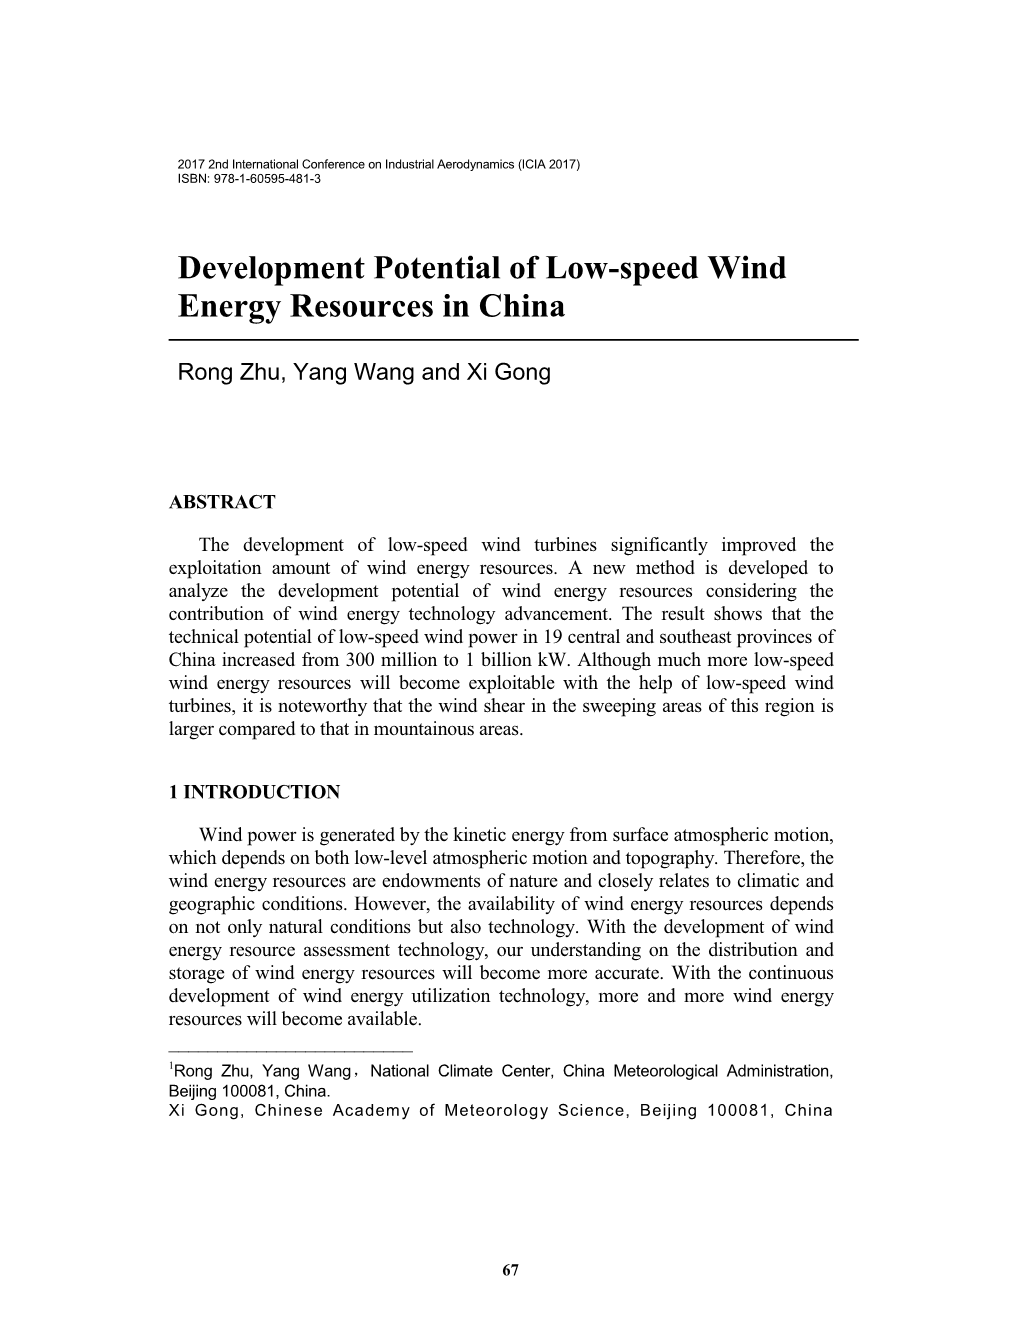 Development Potential of Low-Speed Wind Energy Resources in China